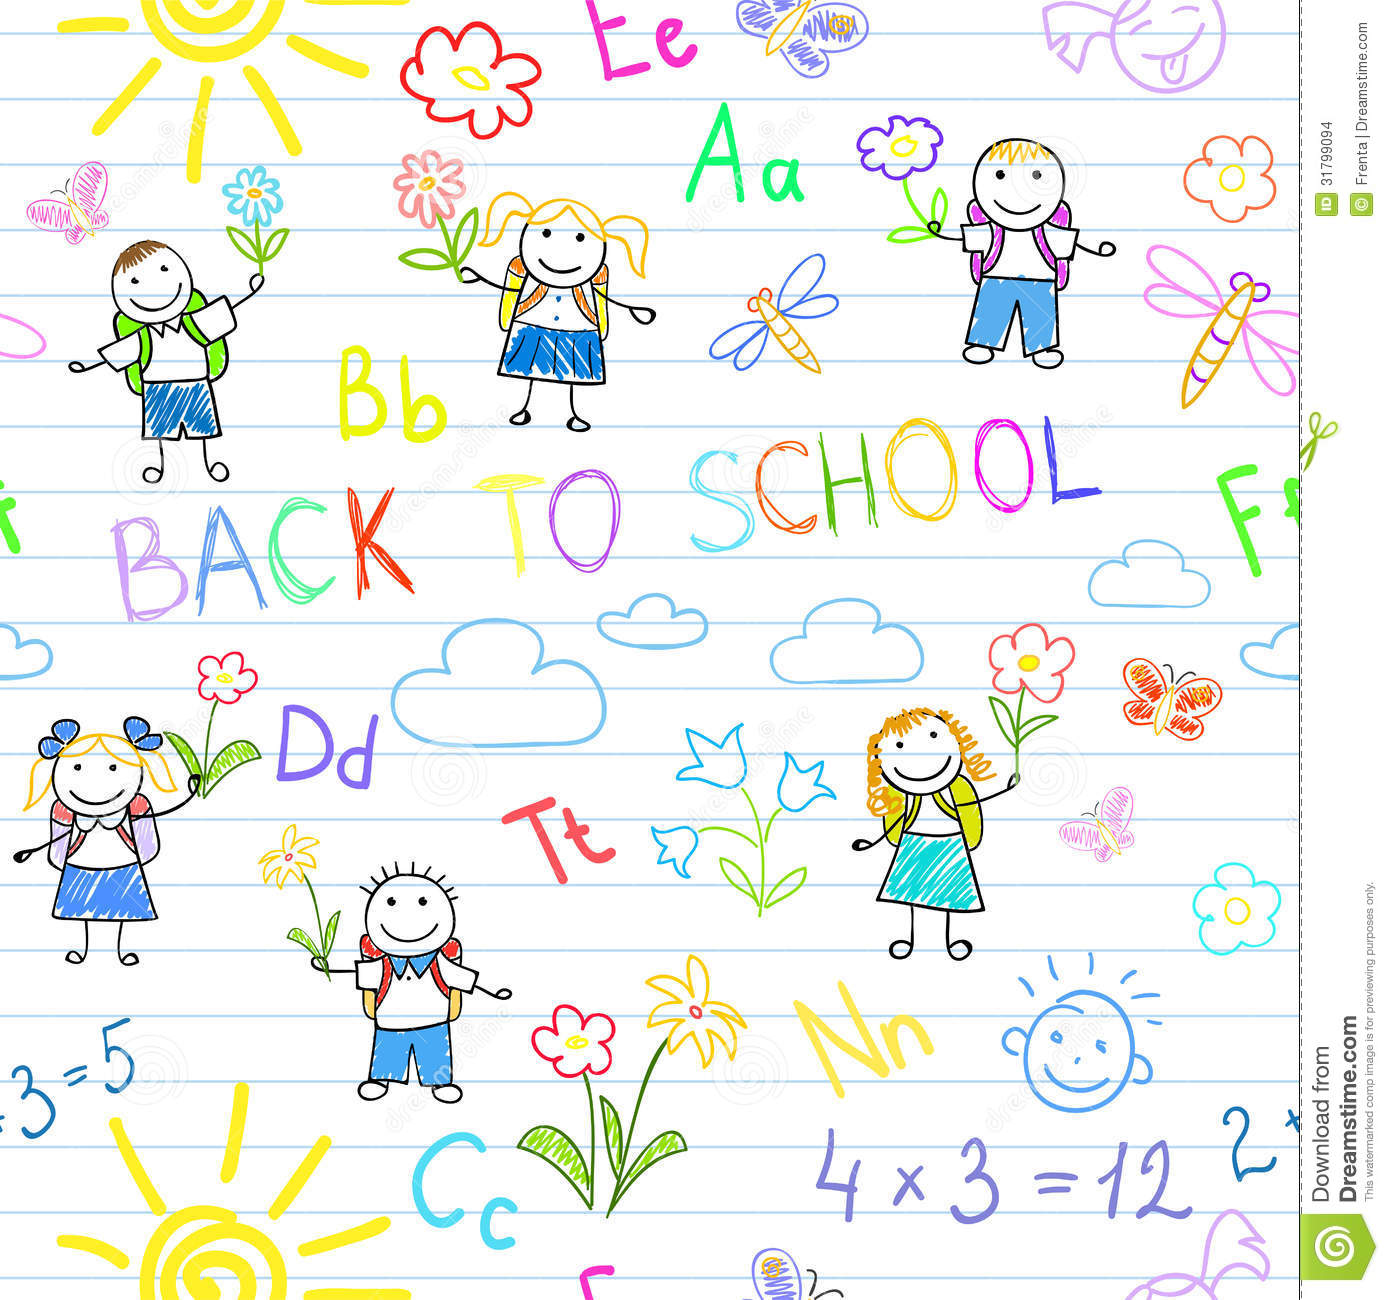 Back To School Backgrounds Back to school stock images 1389x1300